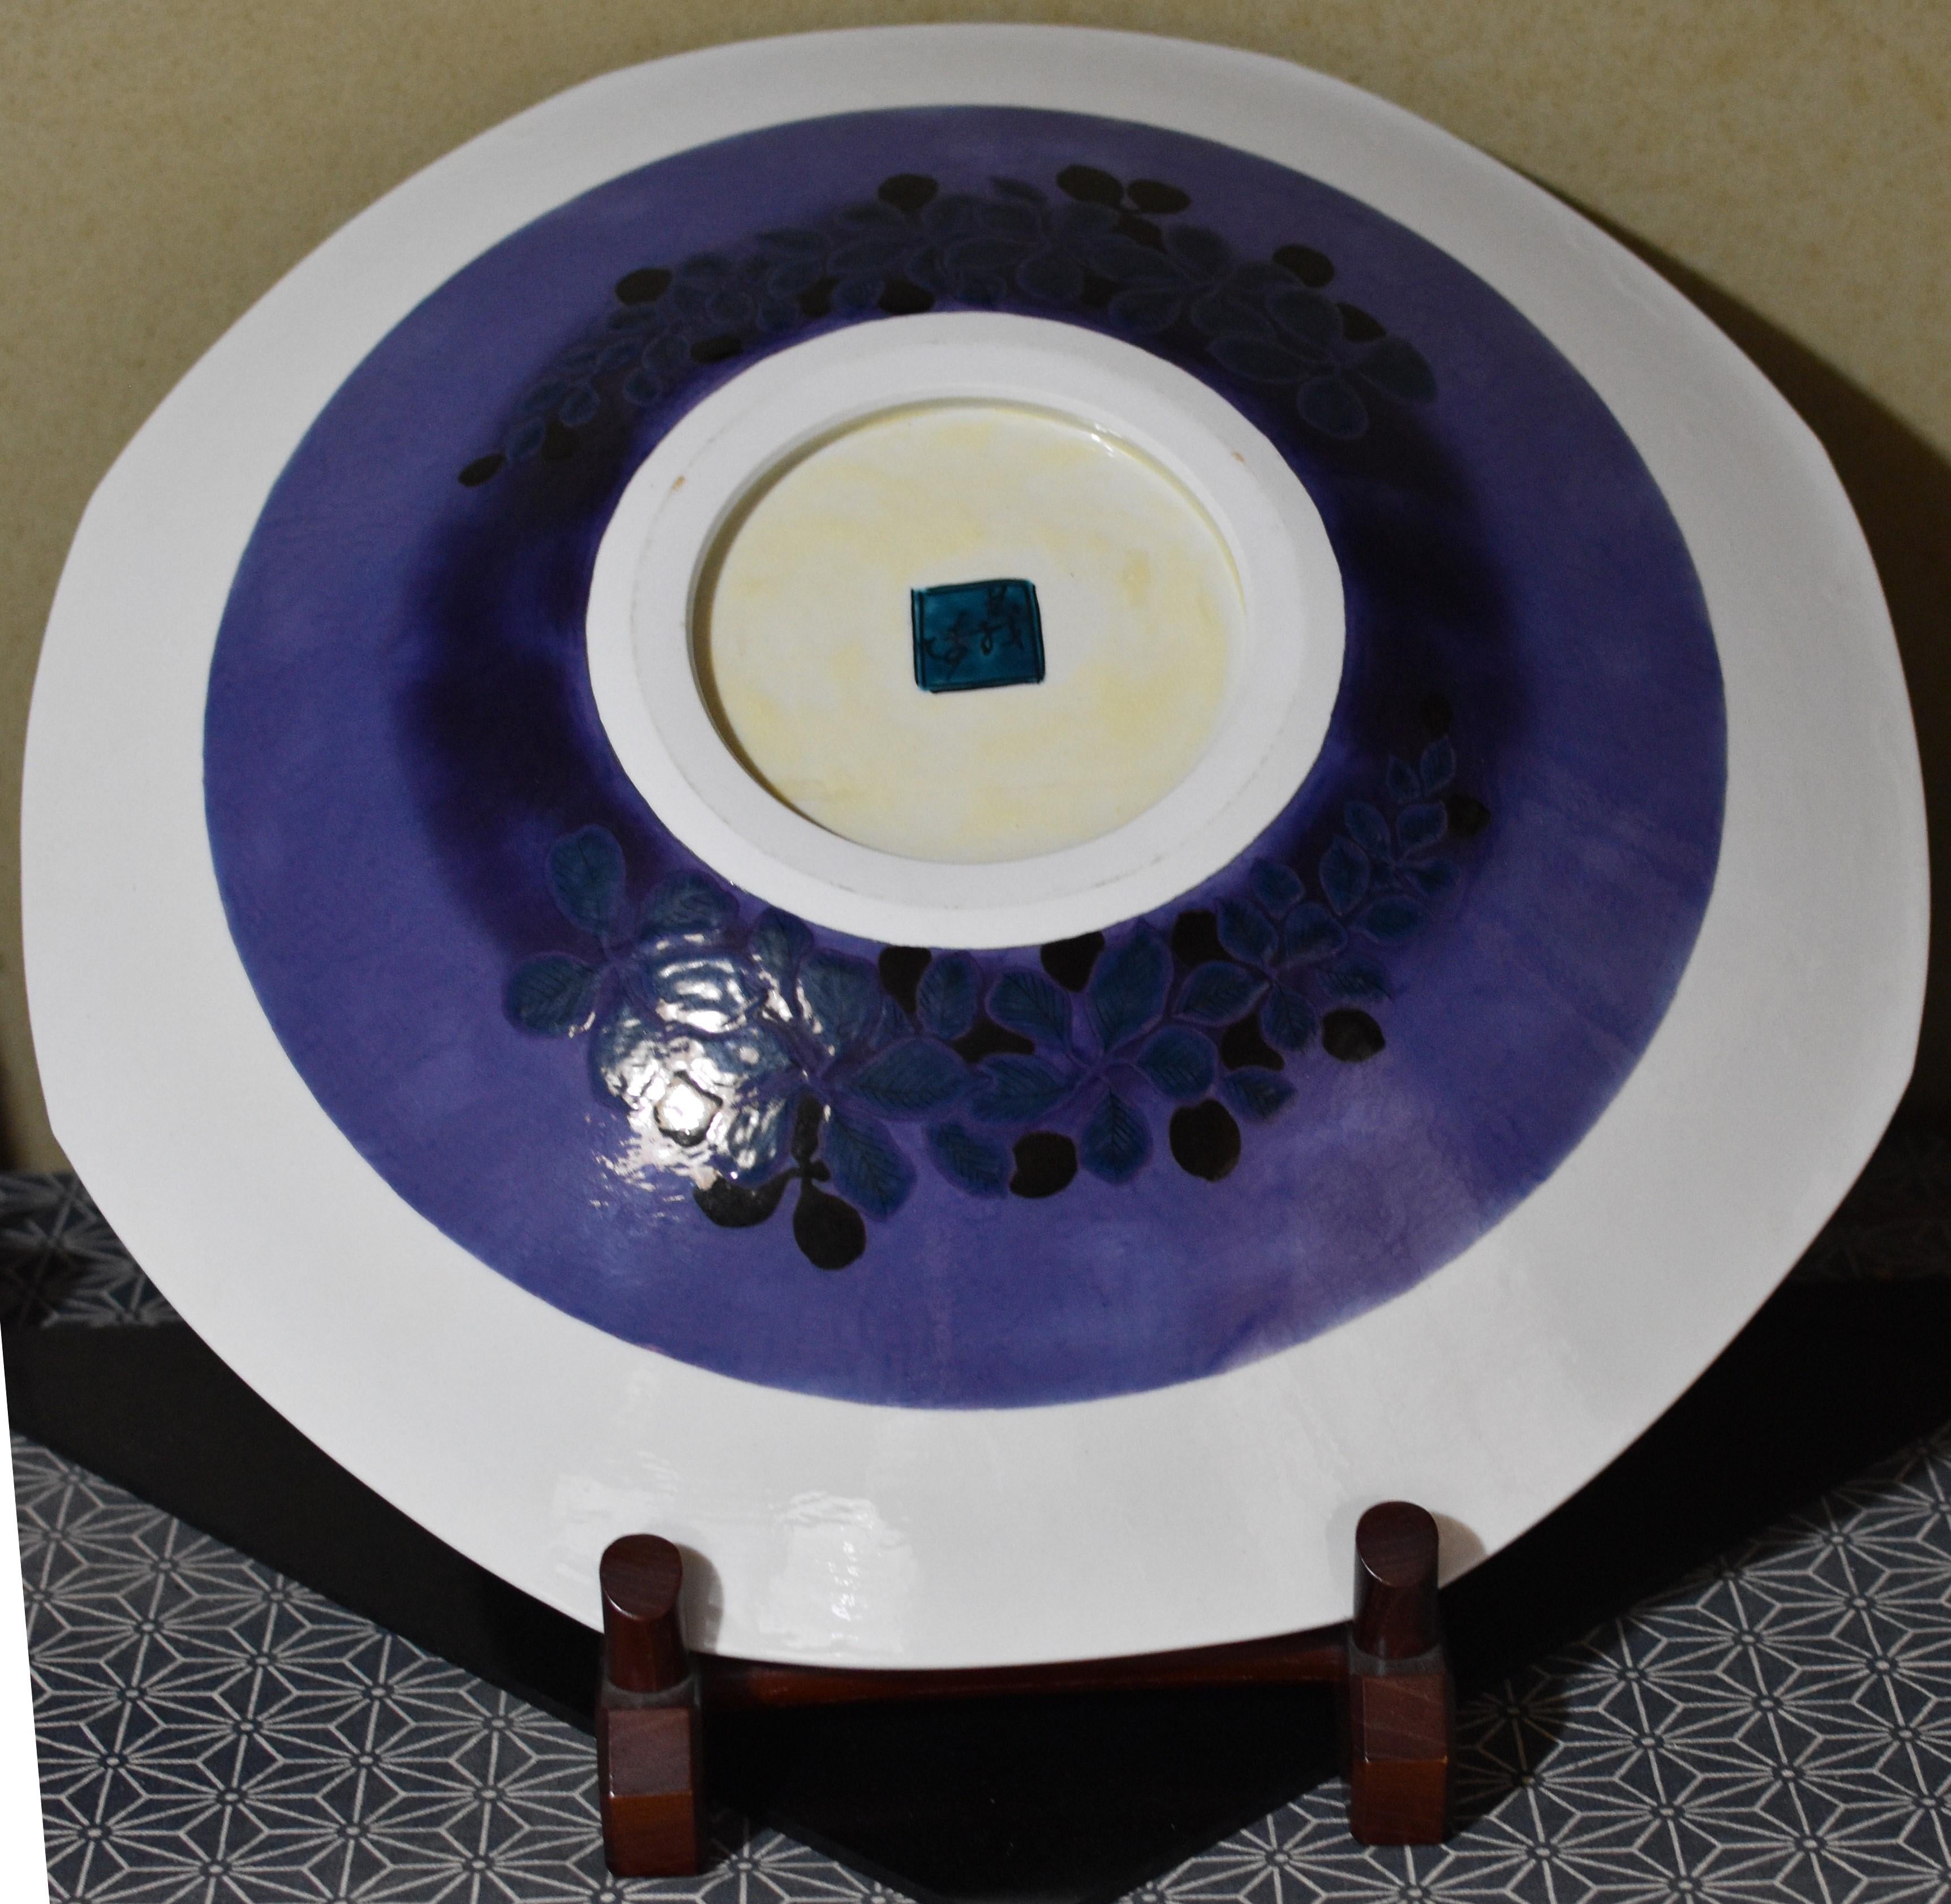 Hand-Painted Japanese Contemporary Black Purple White Porcelain Charger by Master Artist For Sale